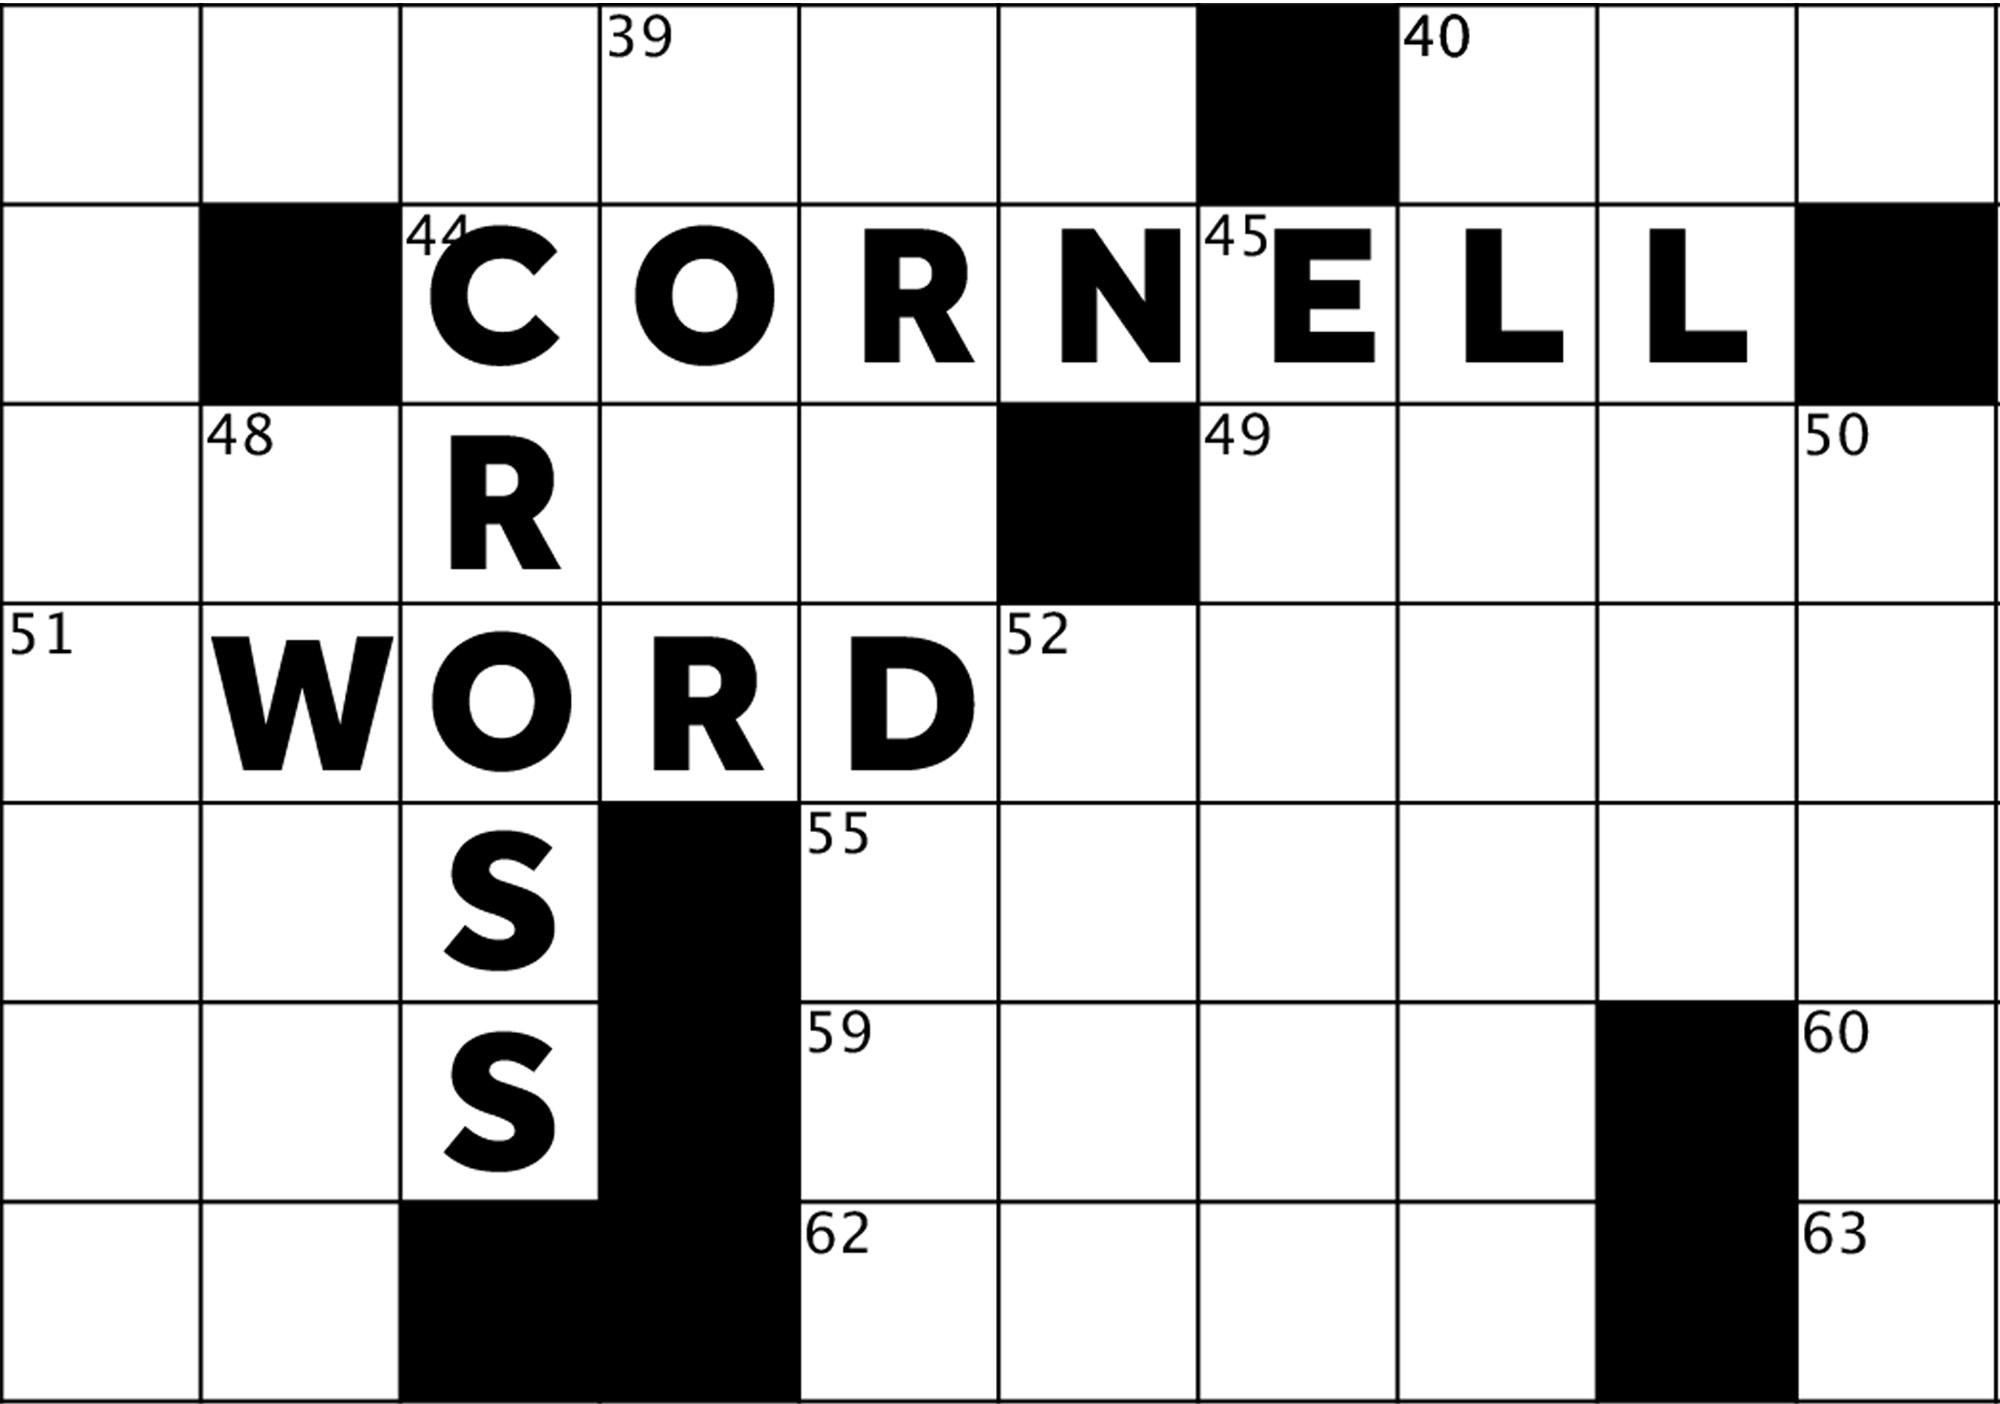 CORNELL CROSSWORD October 19 (Puzzle and Answers) Sunspots